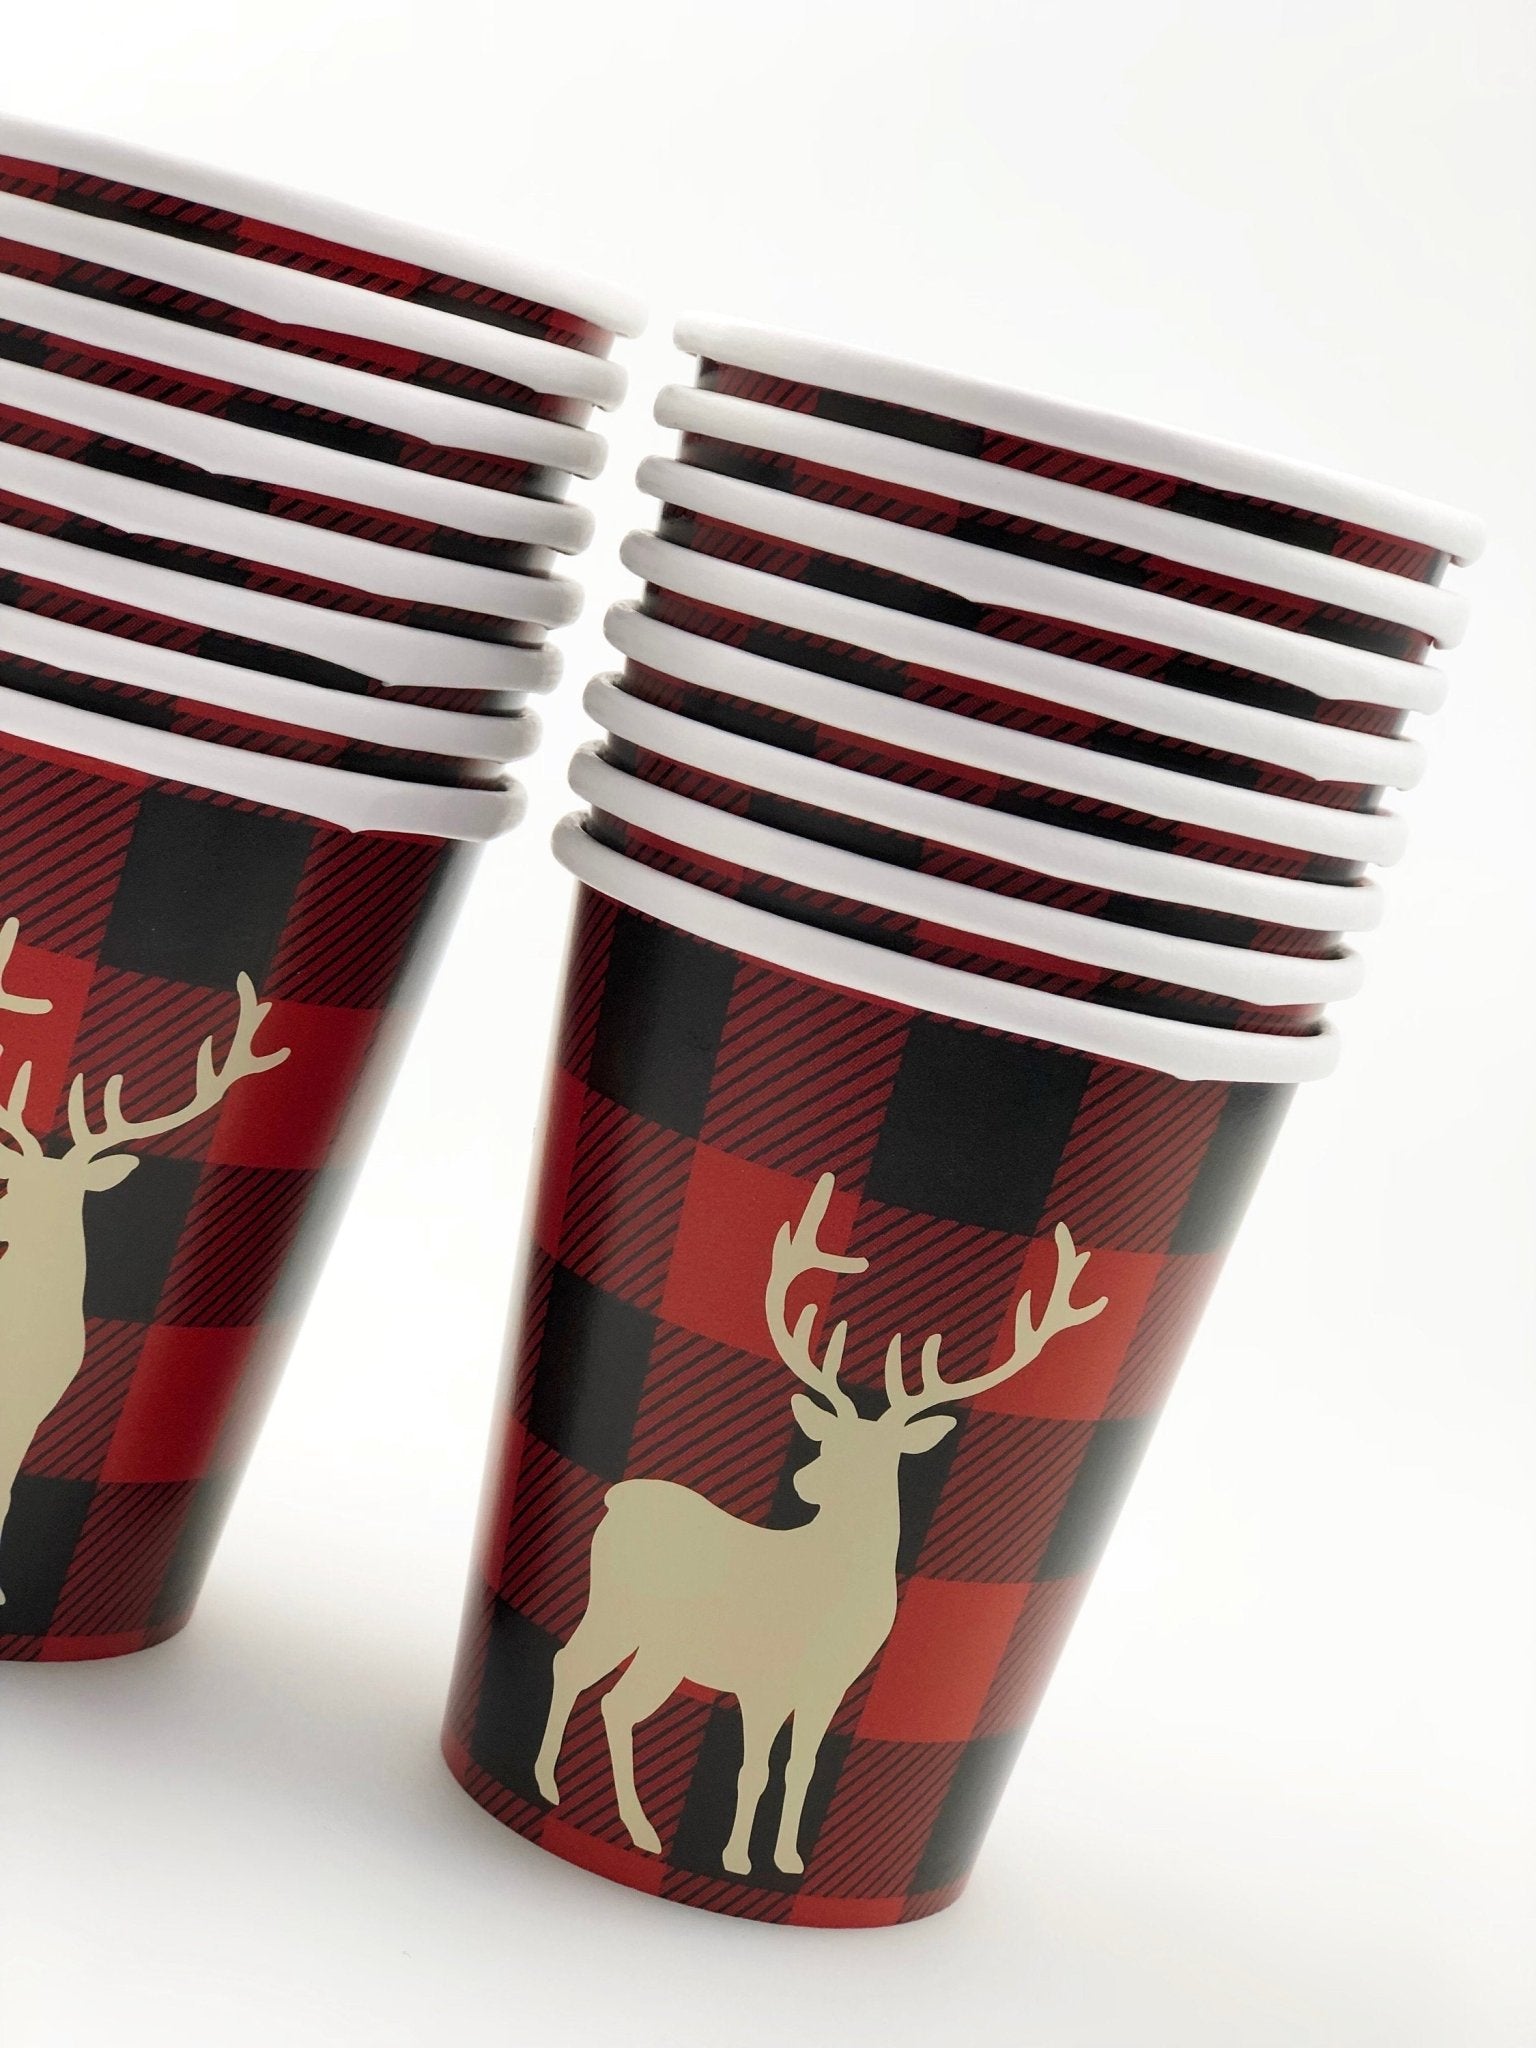 Reindeer Games to Go Cups Coffee Cups / To-go / Christmas Theme